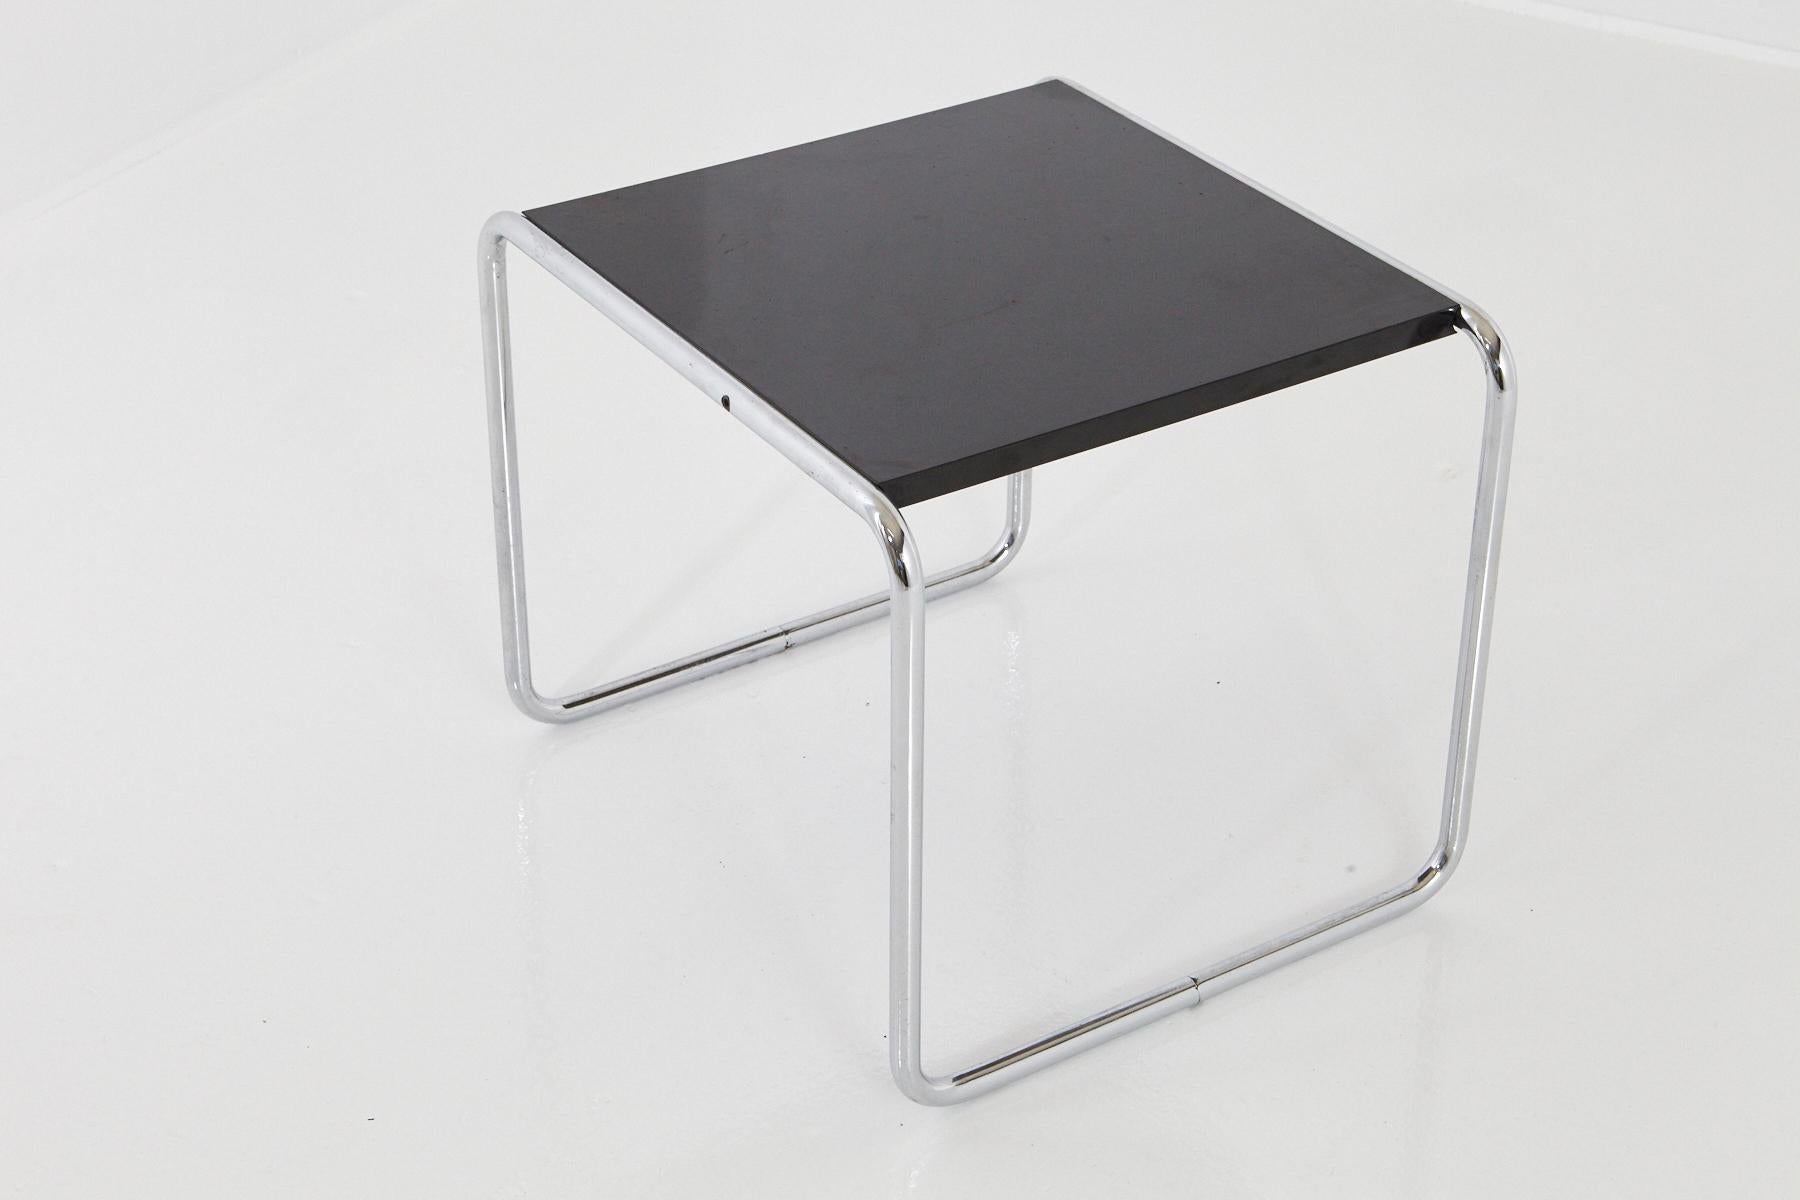 Marcel Breuer 'Laccio' modern side table, the top in black laminate with an MDF core and mounted on a chromed tubular steel frame.
The table dates probably from the 1970s or 1980s. The black laminate in that form doesn't exist anymore, on the